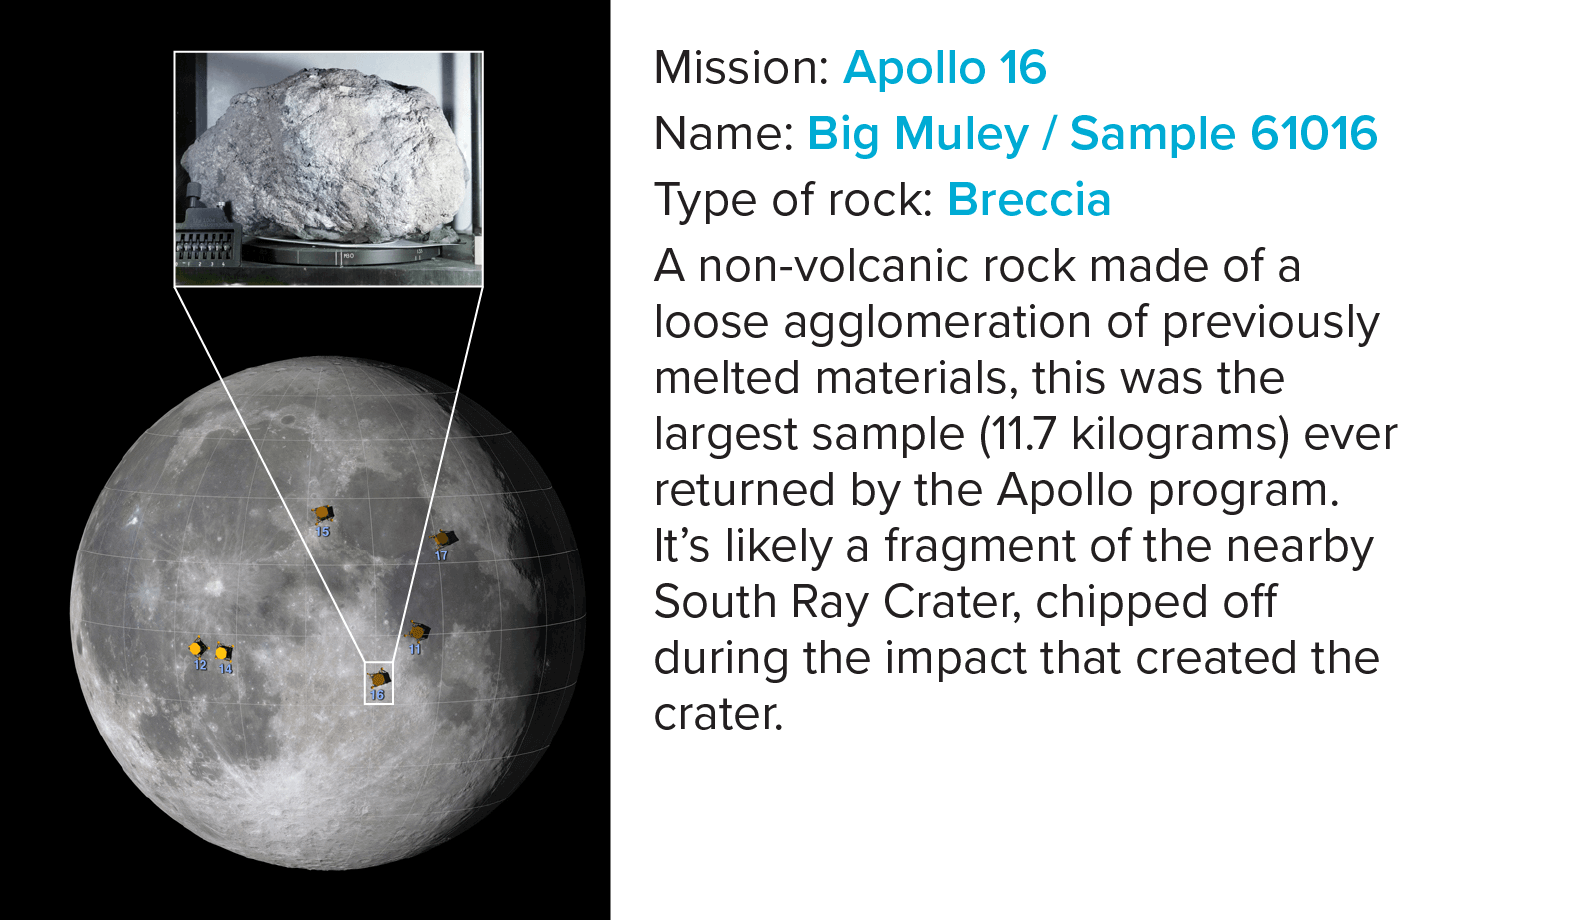 A non-volcanic rock made of a loose agglomeration of previously melted materials, this was the largest sample (11.7 kilograms) ever returned by the Apollo program. It’s likely a fragment of the nearby South Ray Crater, chipped o during the impact that created the crater. 